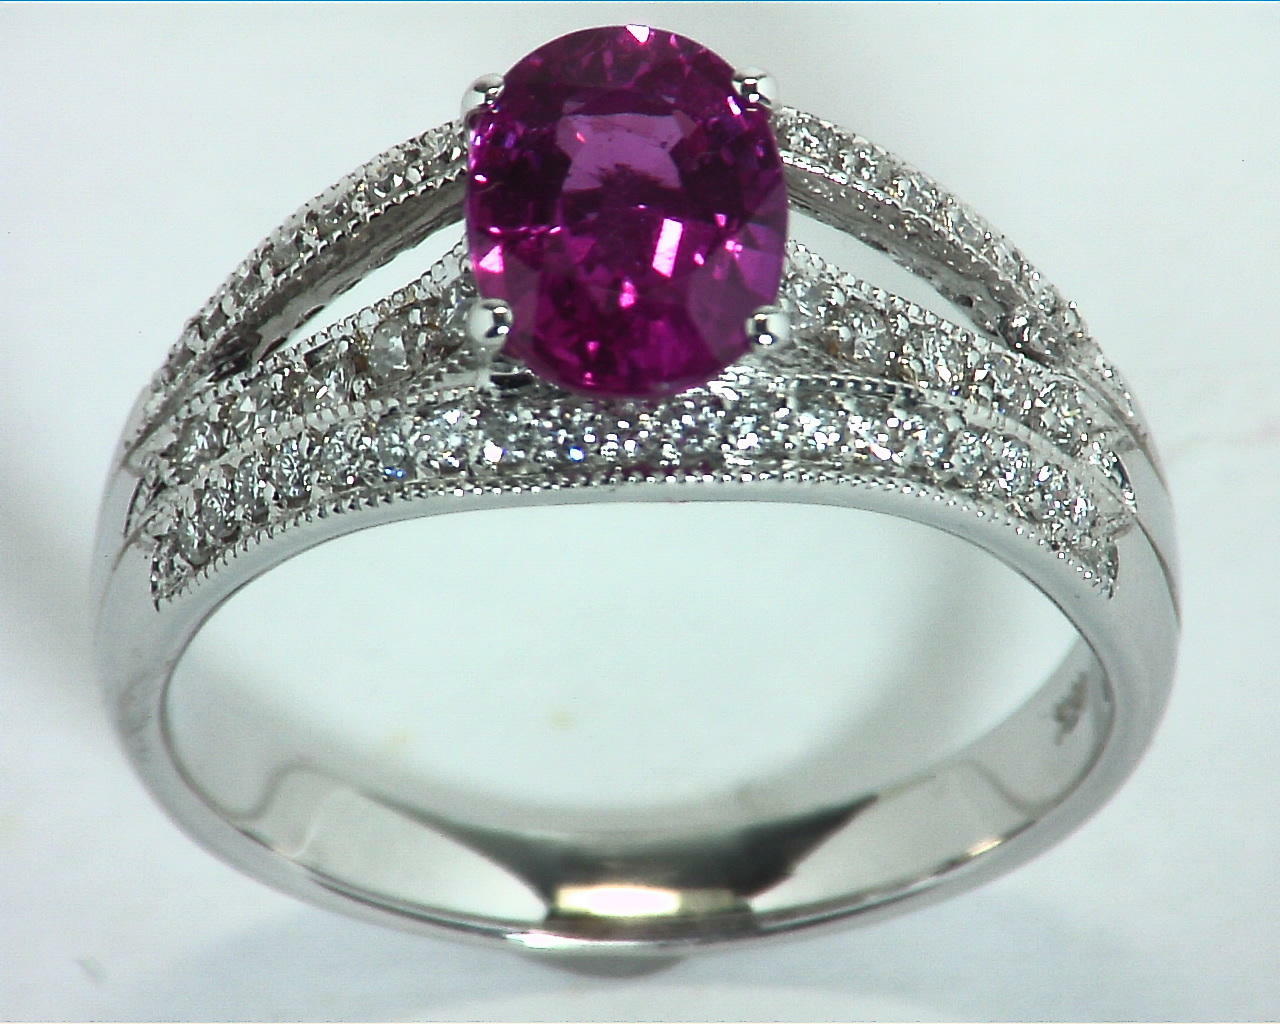 Pink Sapphire 18 kt Gold Engagement Ring in a unique DesignRFK,305 6